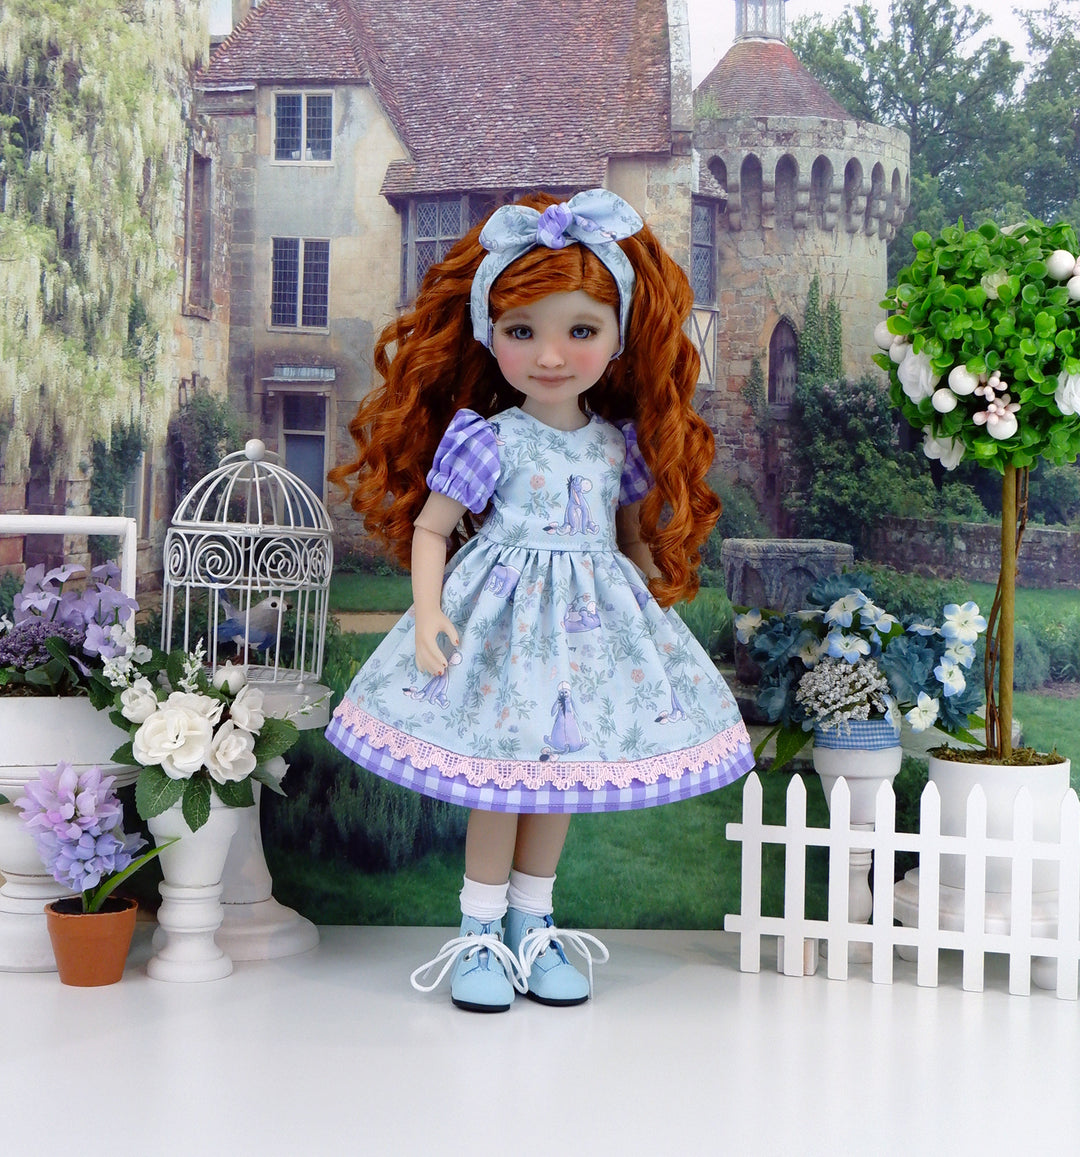 Little Eeyore - dress and boots for Ruby Red Fashion Friends doll